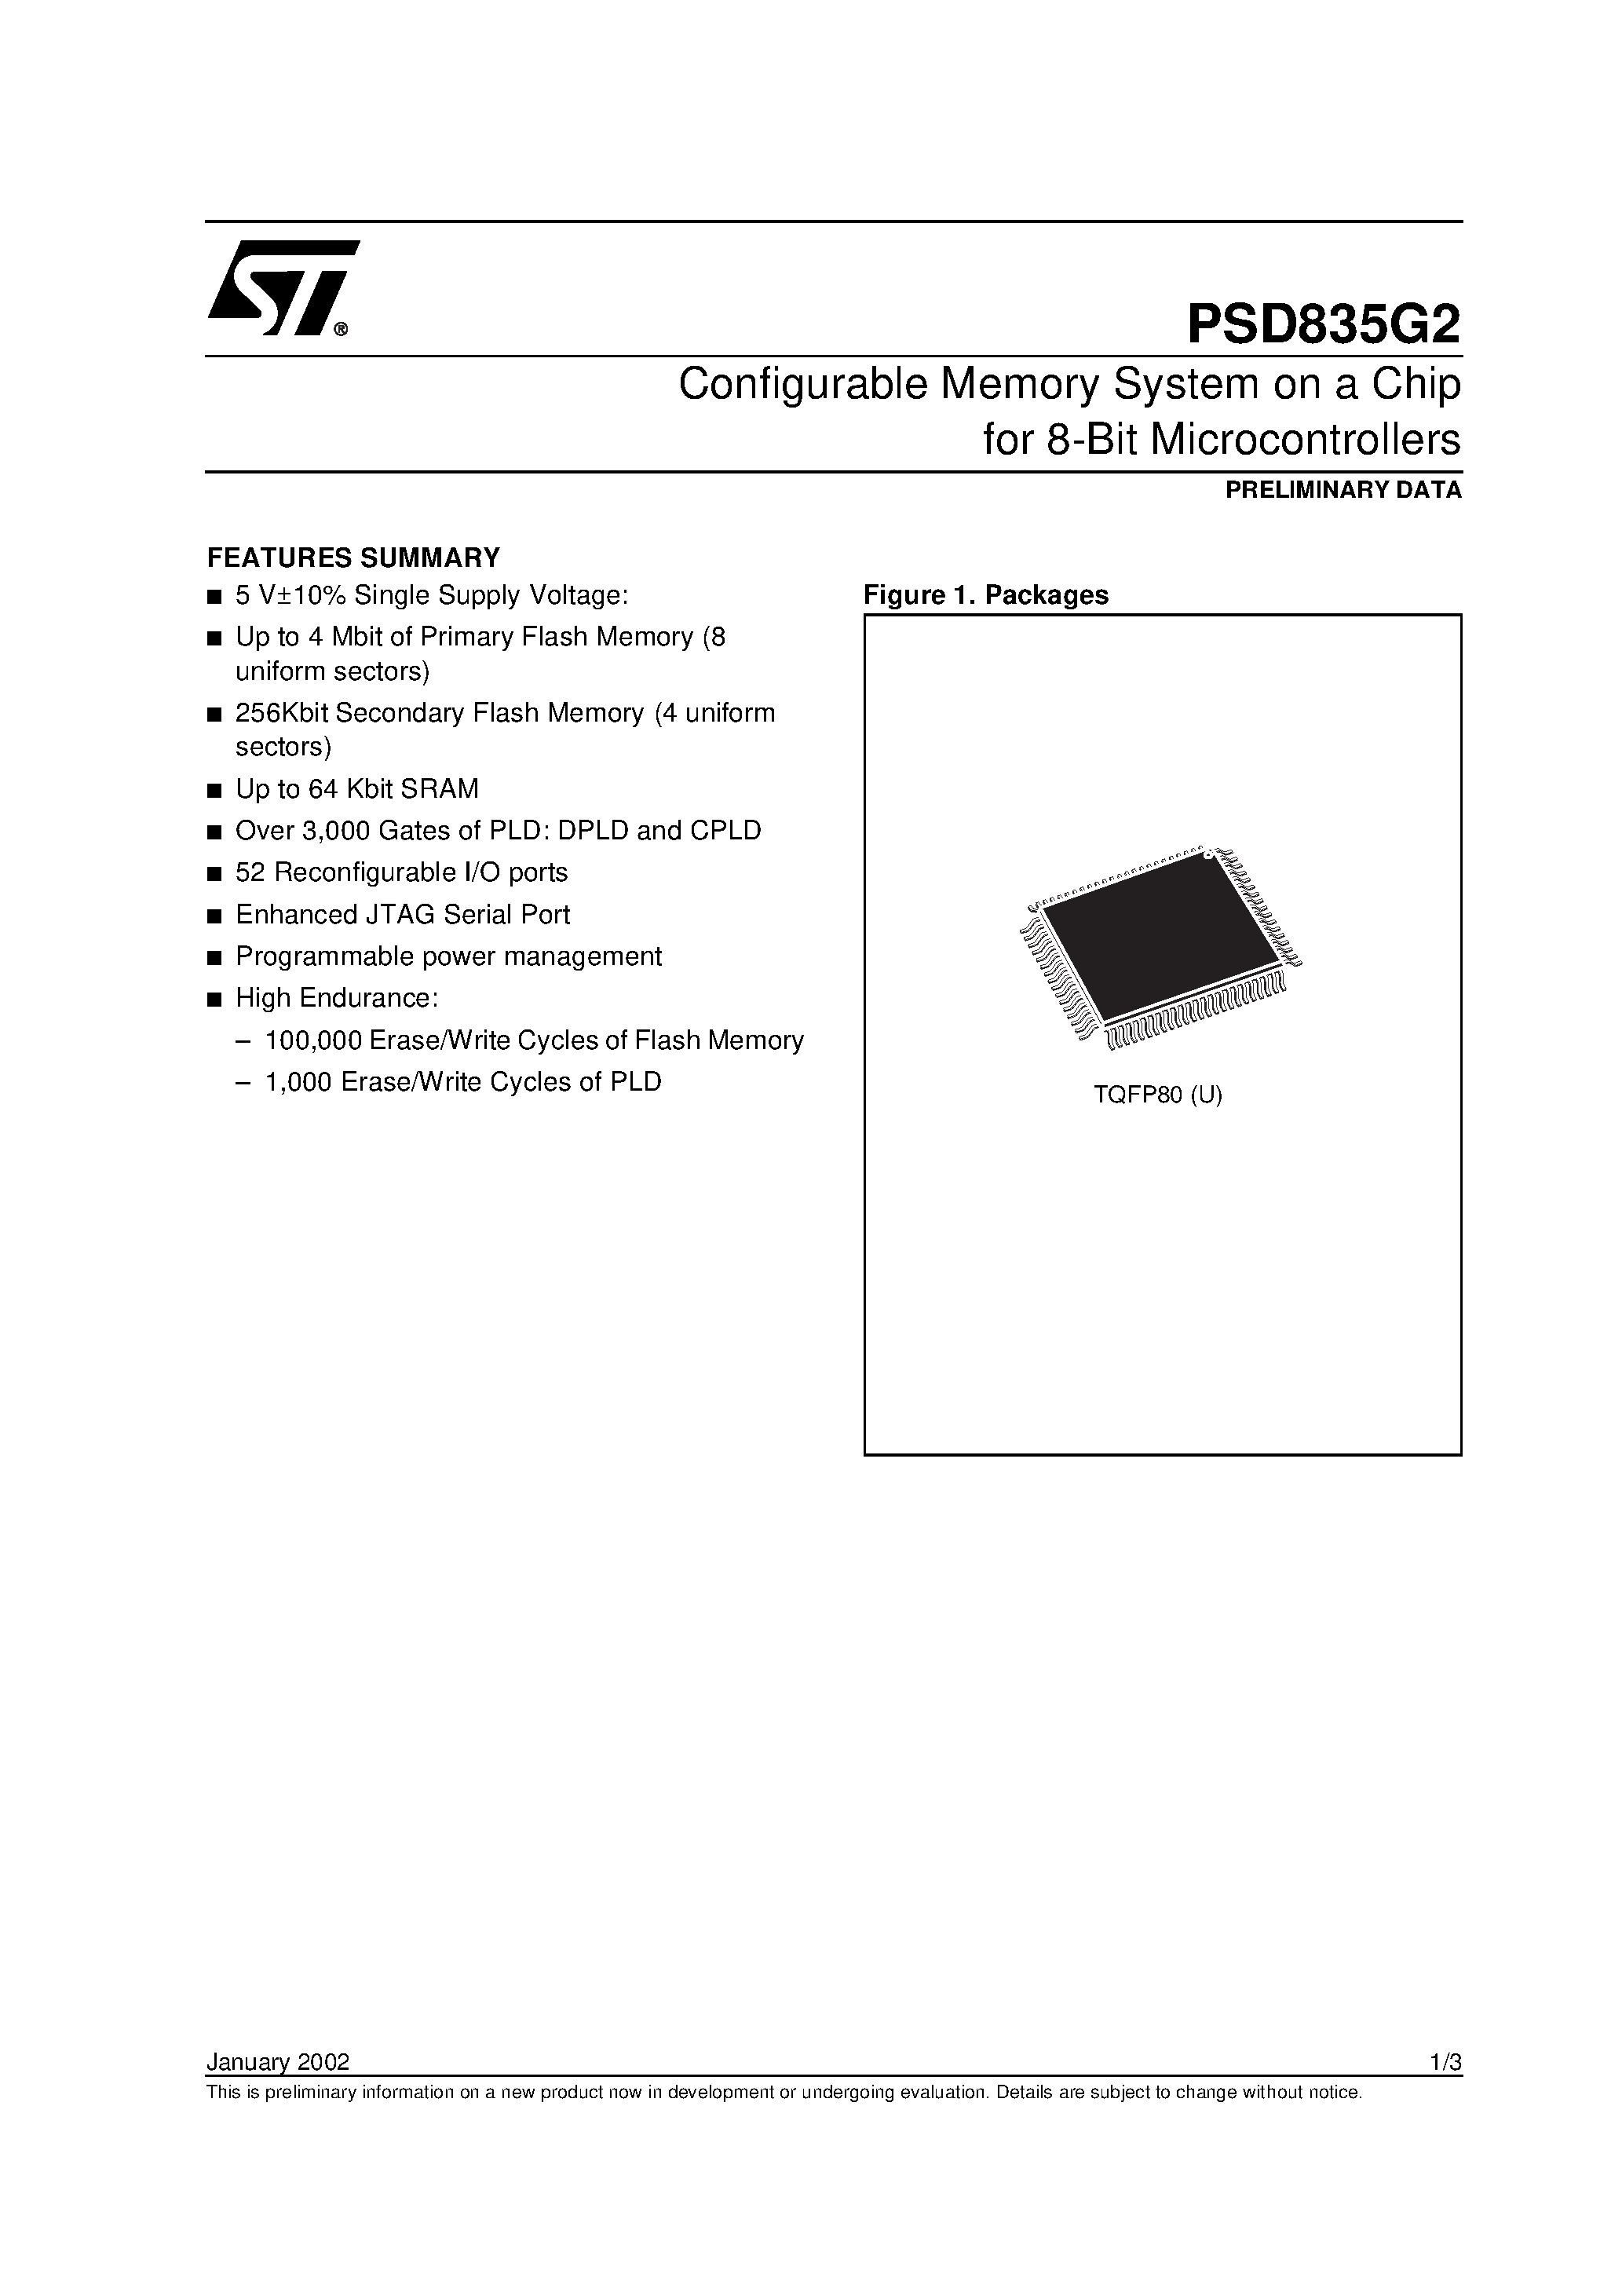 Datasheet PSD835F1V-A-90J - Configurable Memory System on a Chip for 8-Bit Microcontrollers page 1